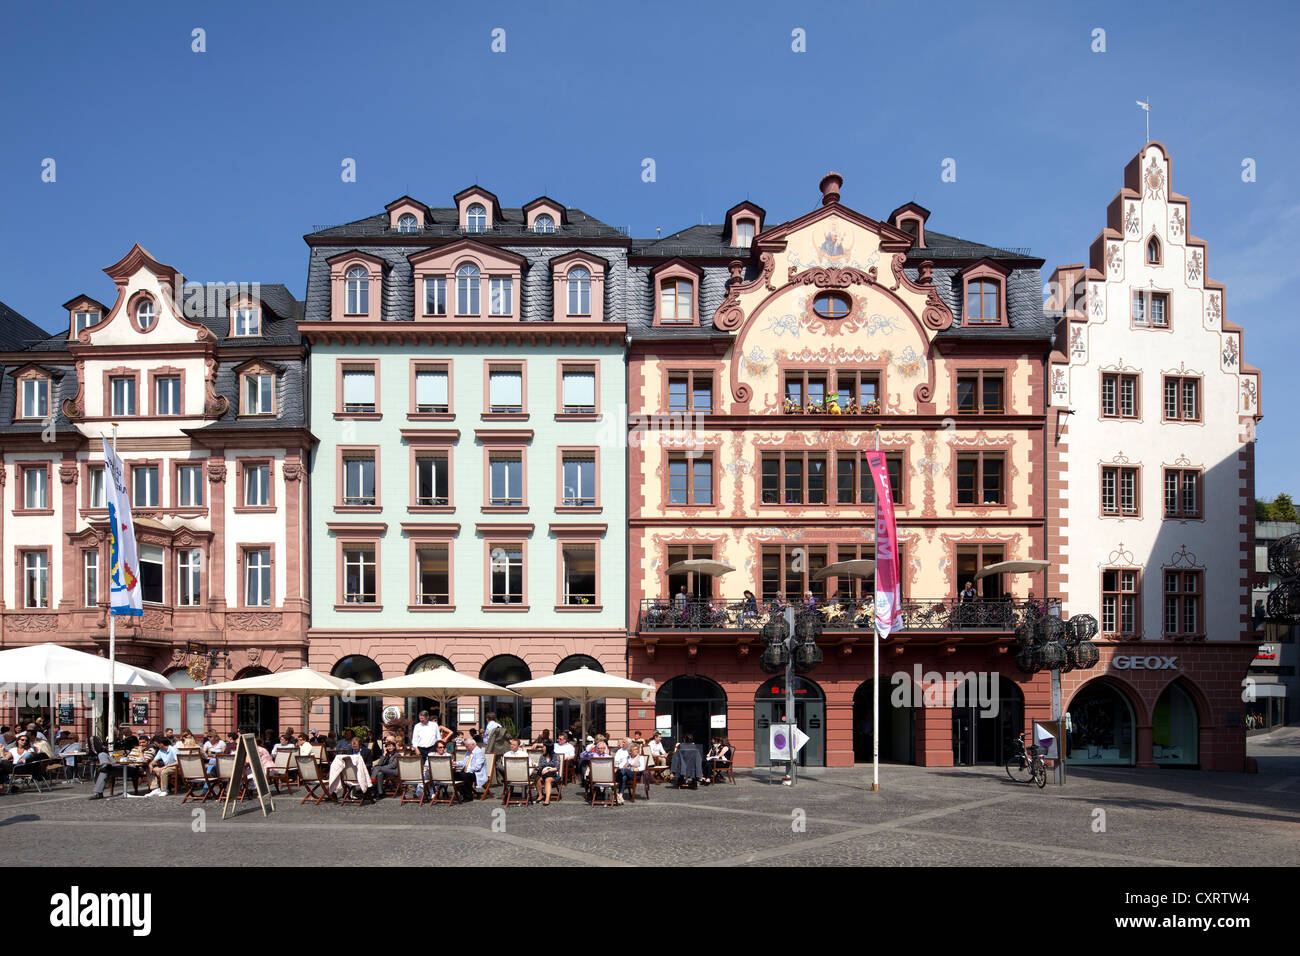 Restored town houses on Markt square, commercial buildings, Mainz, Rhineland-Palatinate, Germany, Europe, PublicGround Stock Photo